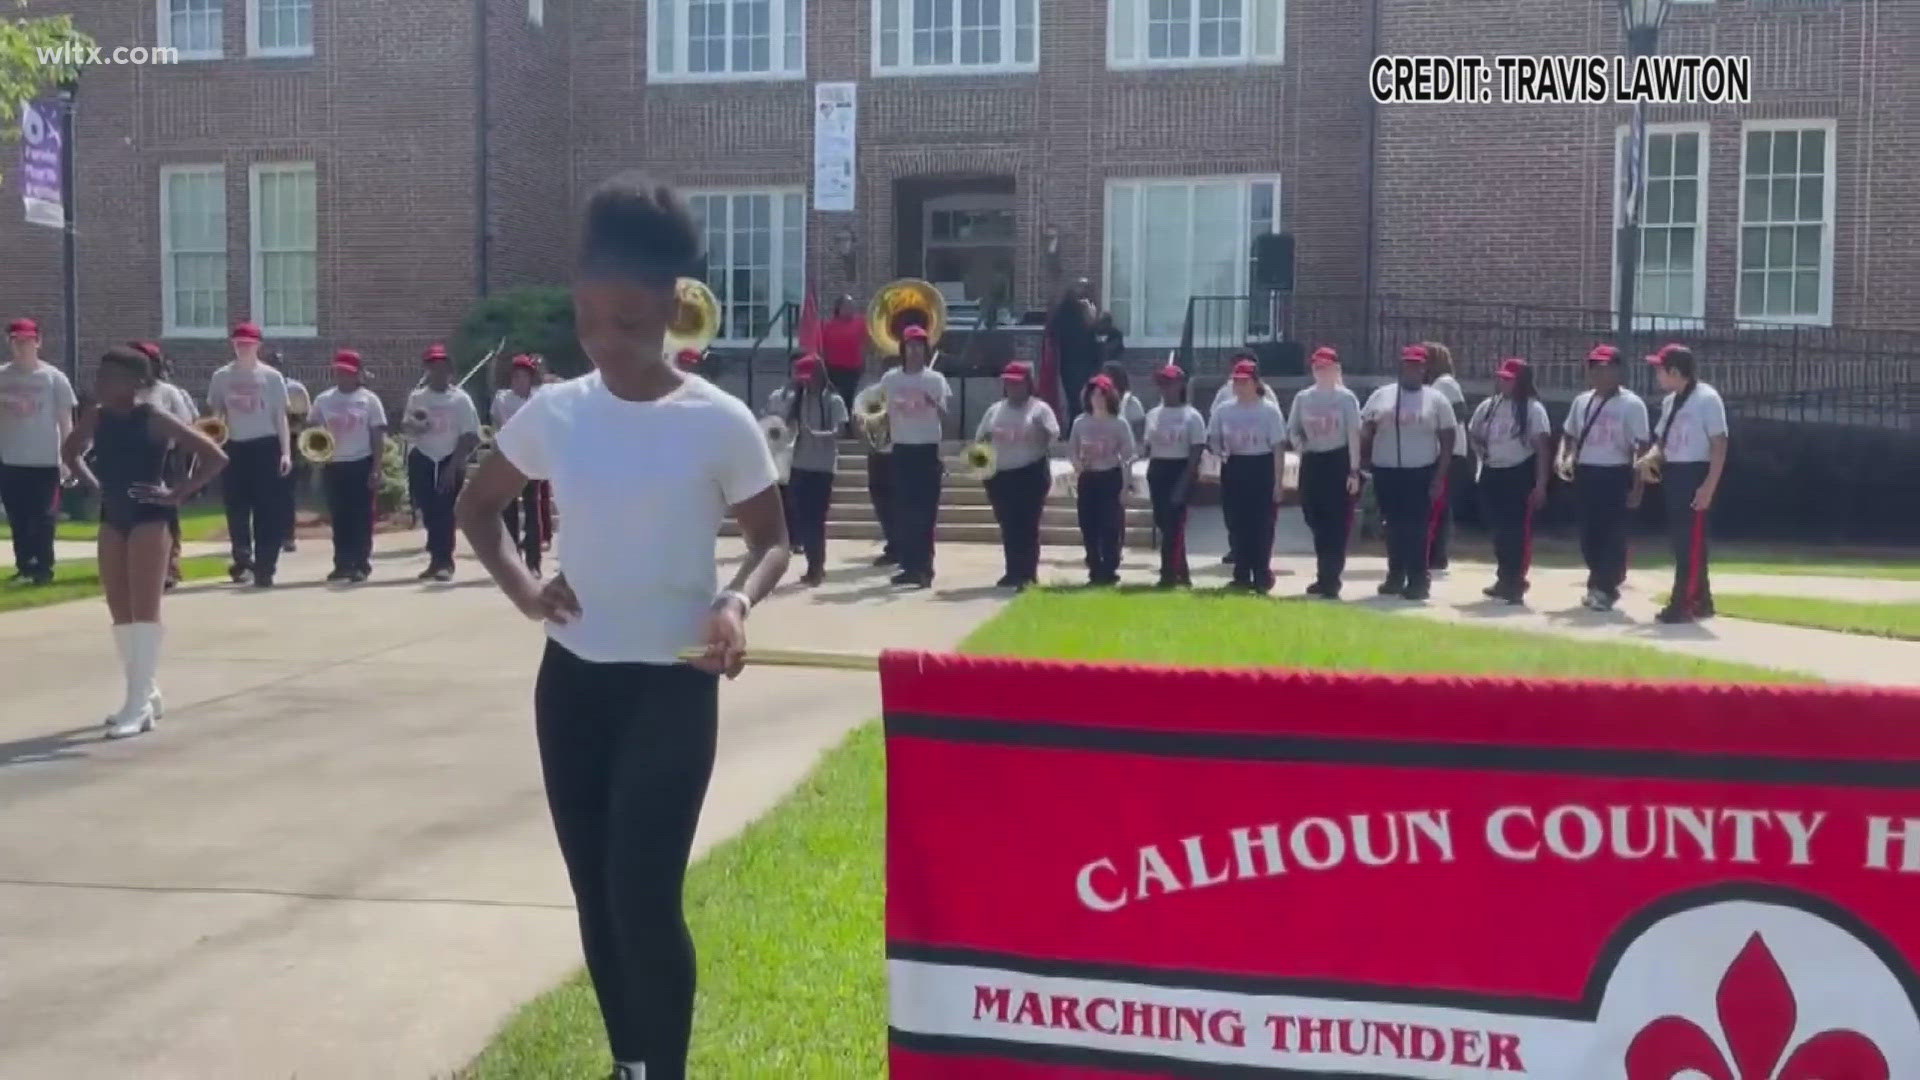 The 'Thunder and Lightening' Band from St. Matthews Calhoun County High School is heading to Washington D.C. to perform.